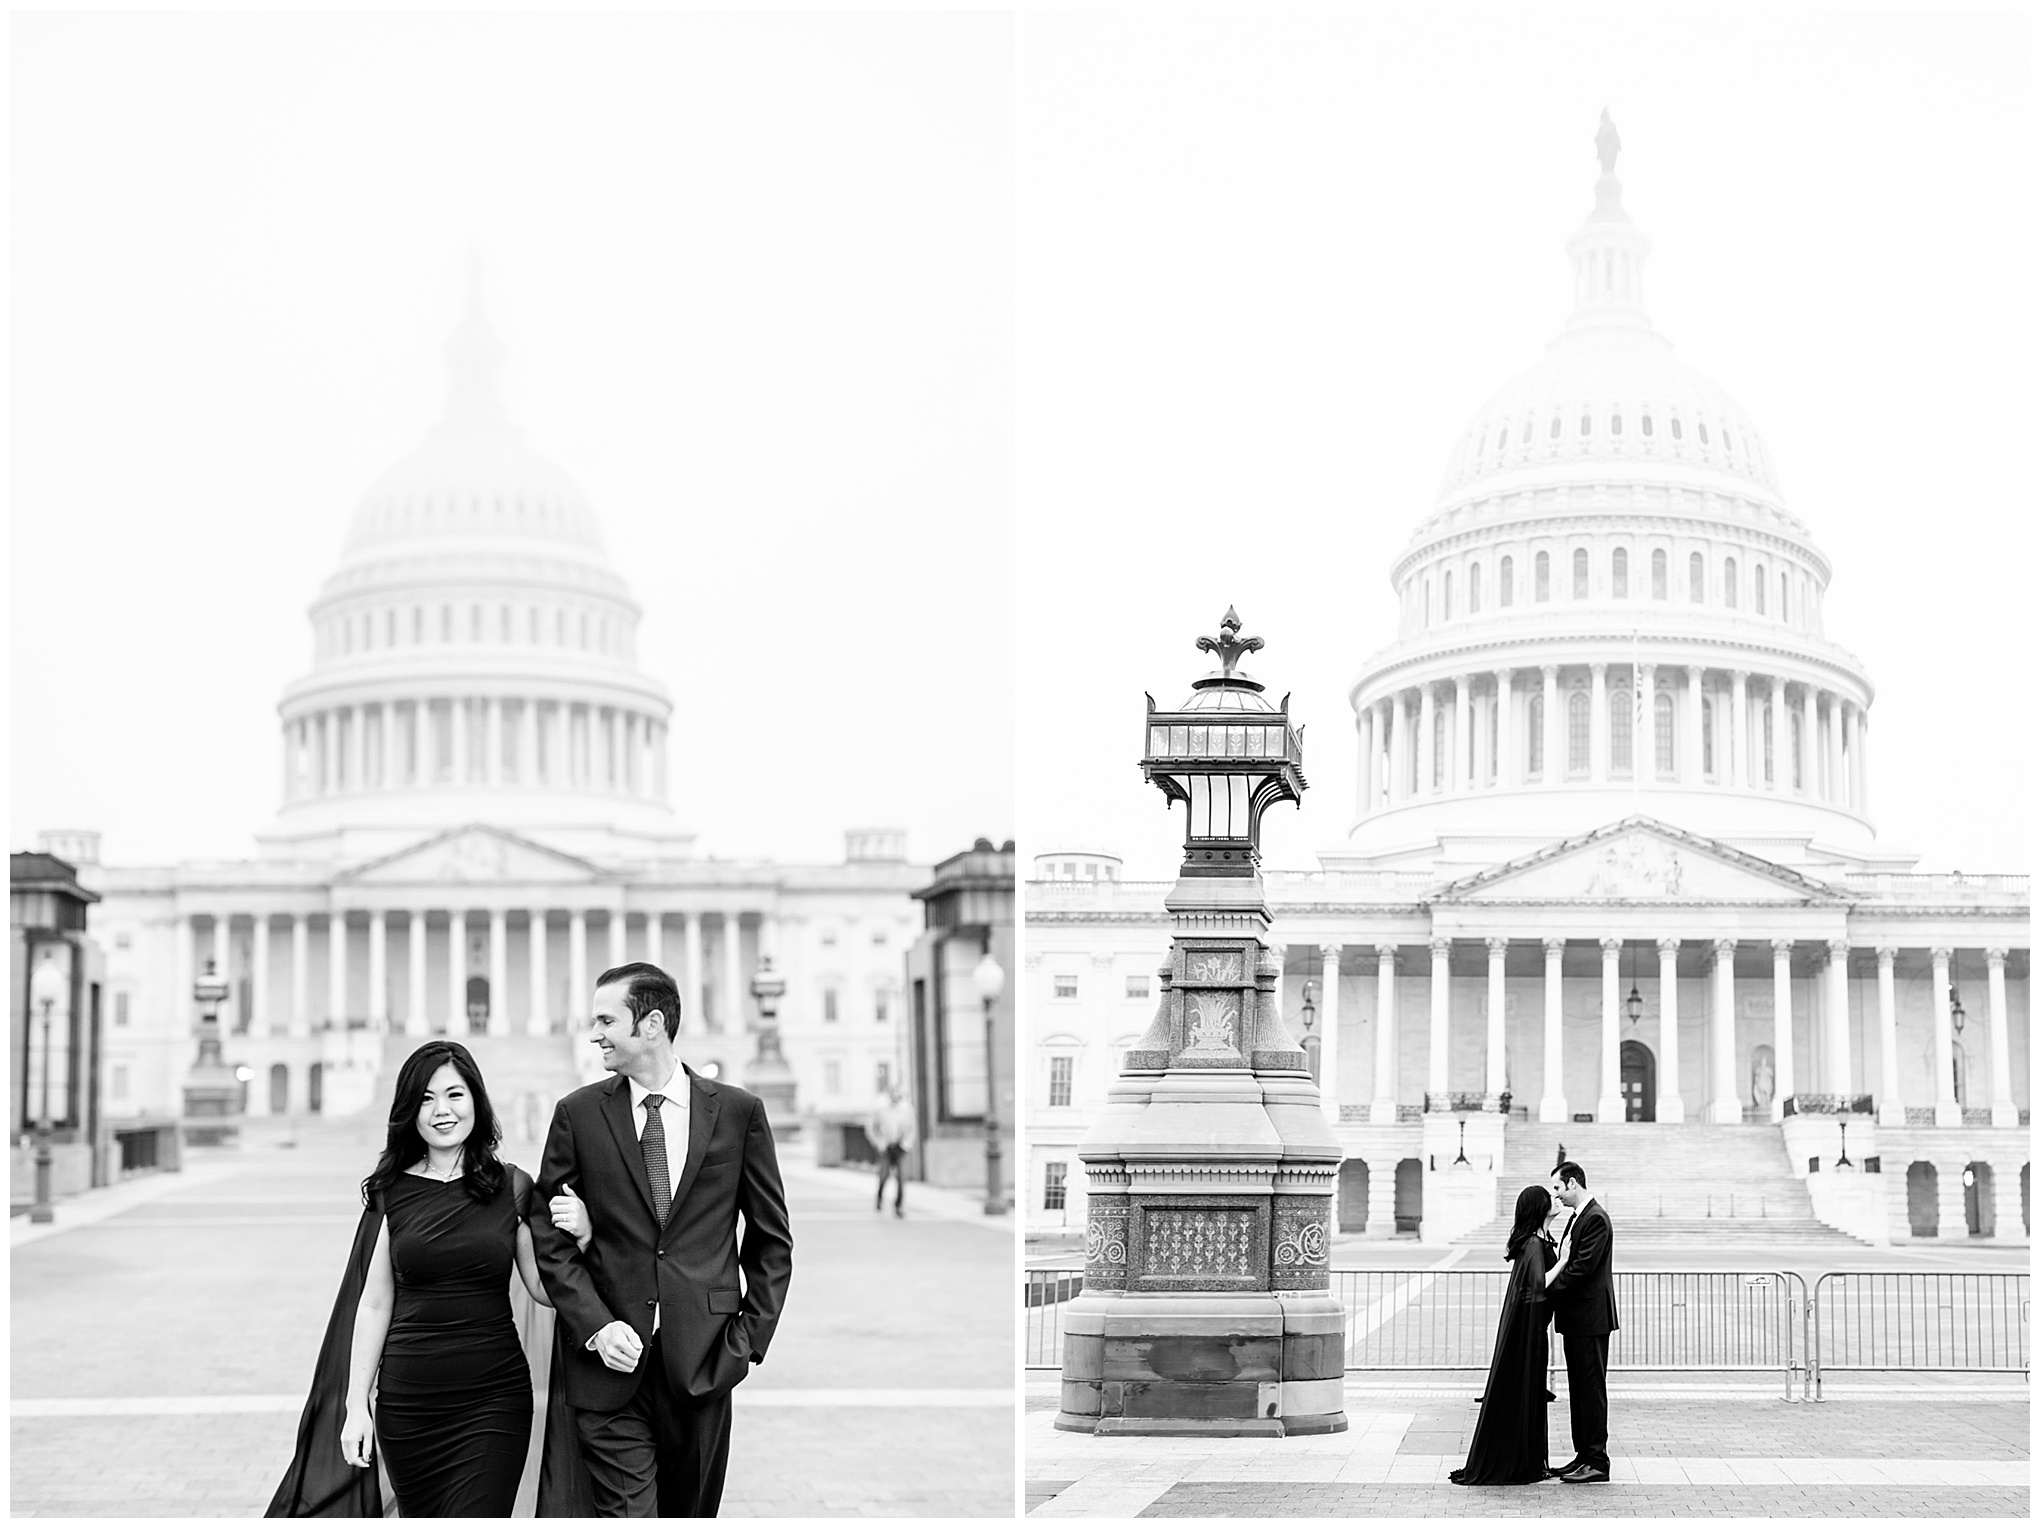 formal Capitol Hill engagement photos, formal engagement photos, Capitol Hill engagement session, Capitol Hill photographer, Washington DC engagement photos, DC wedding photographer, DC engagement photographer, classic engagement photos, fancy engagement photos, formal wear, engagement session outfits, Rachel E.H. Photographer, wine colored gown, black and white engagement photos